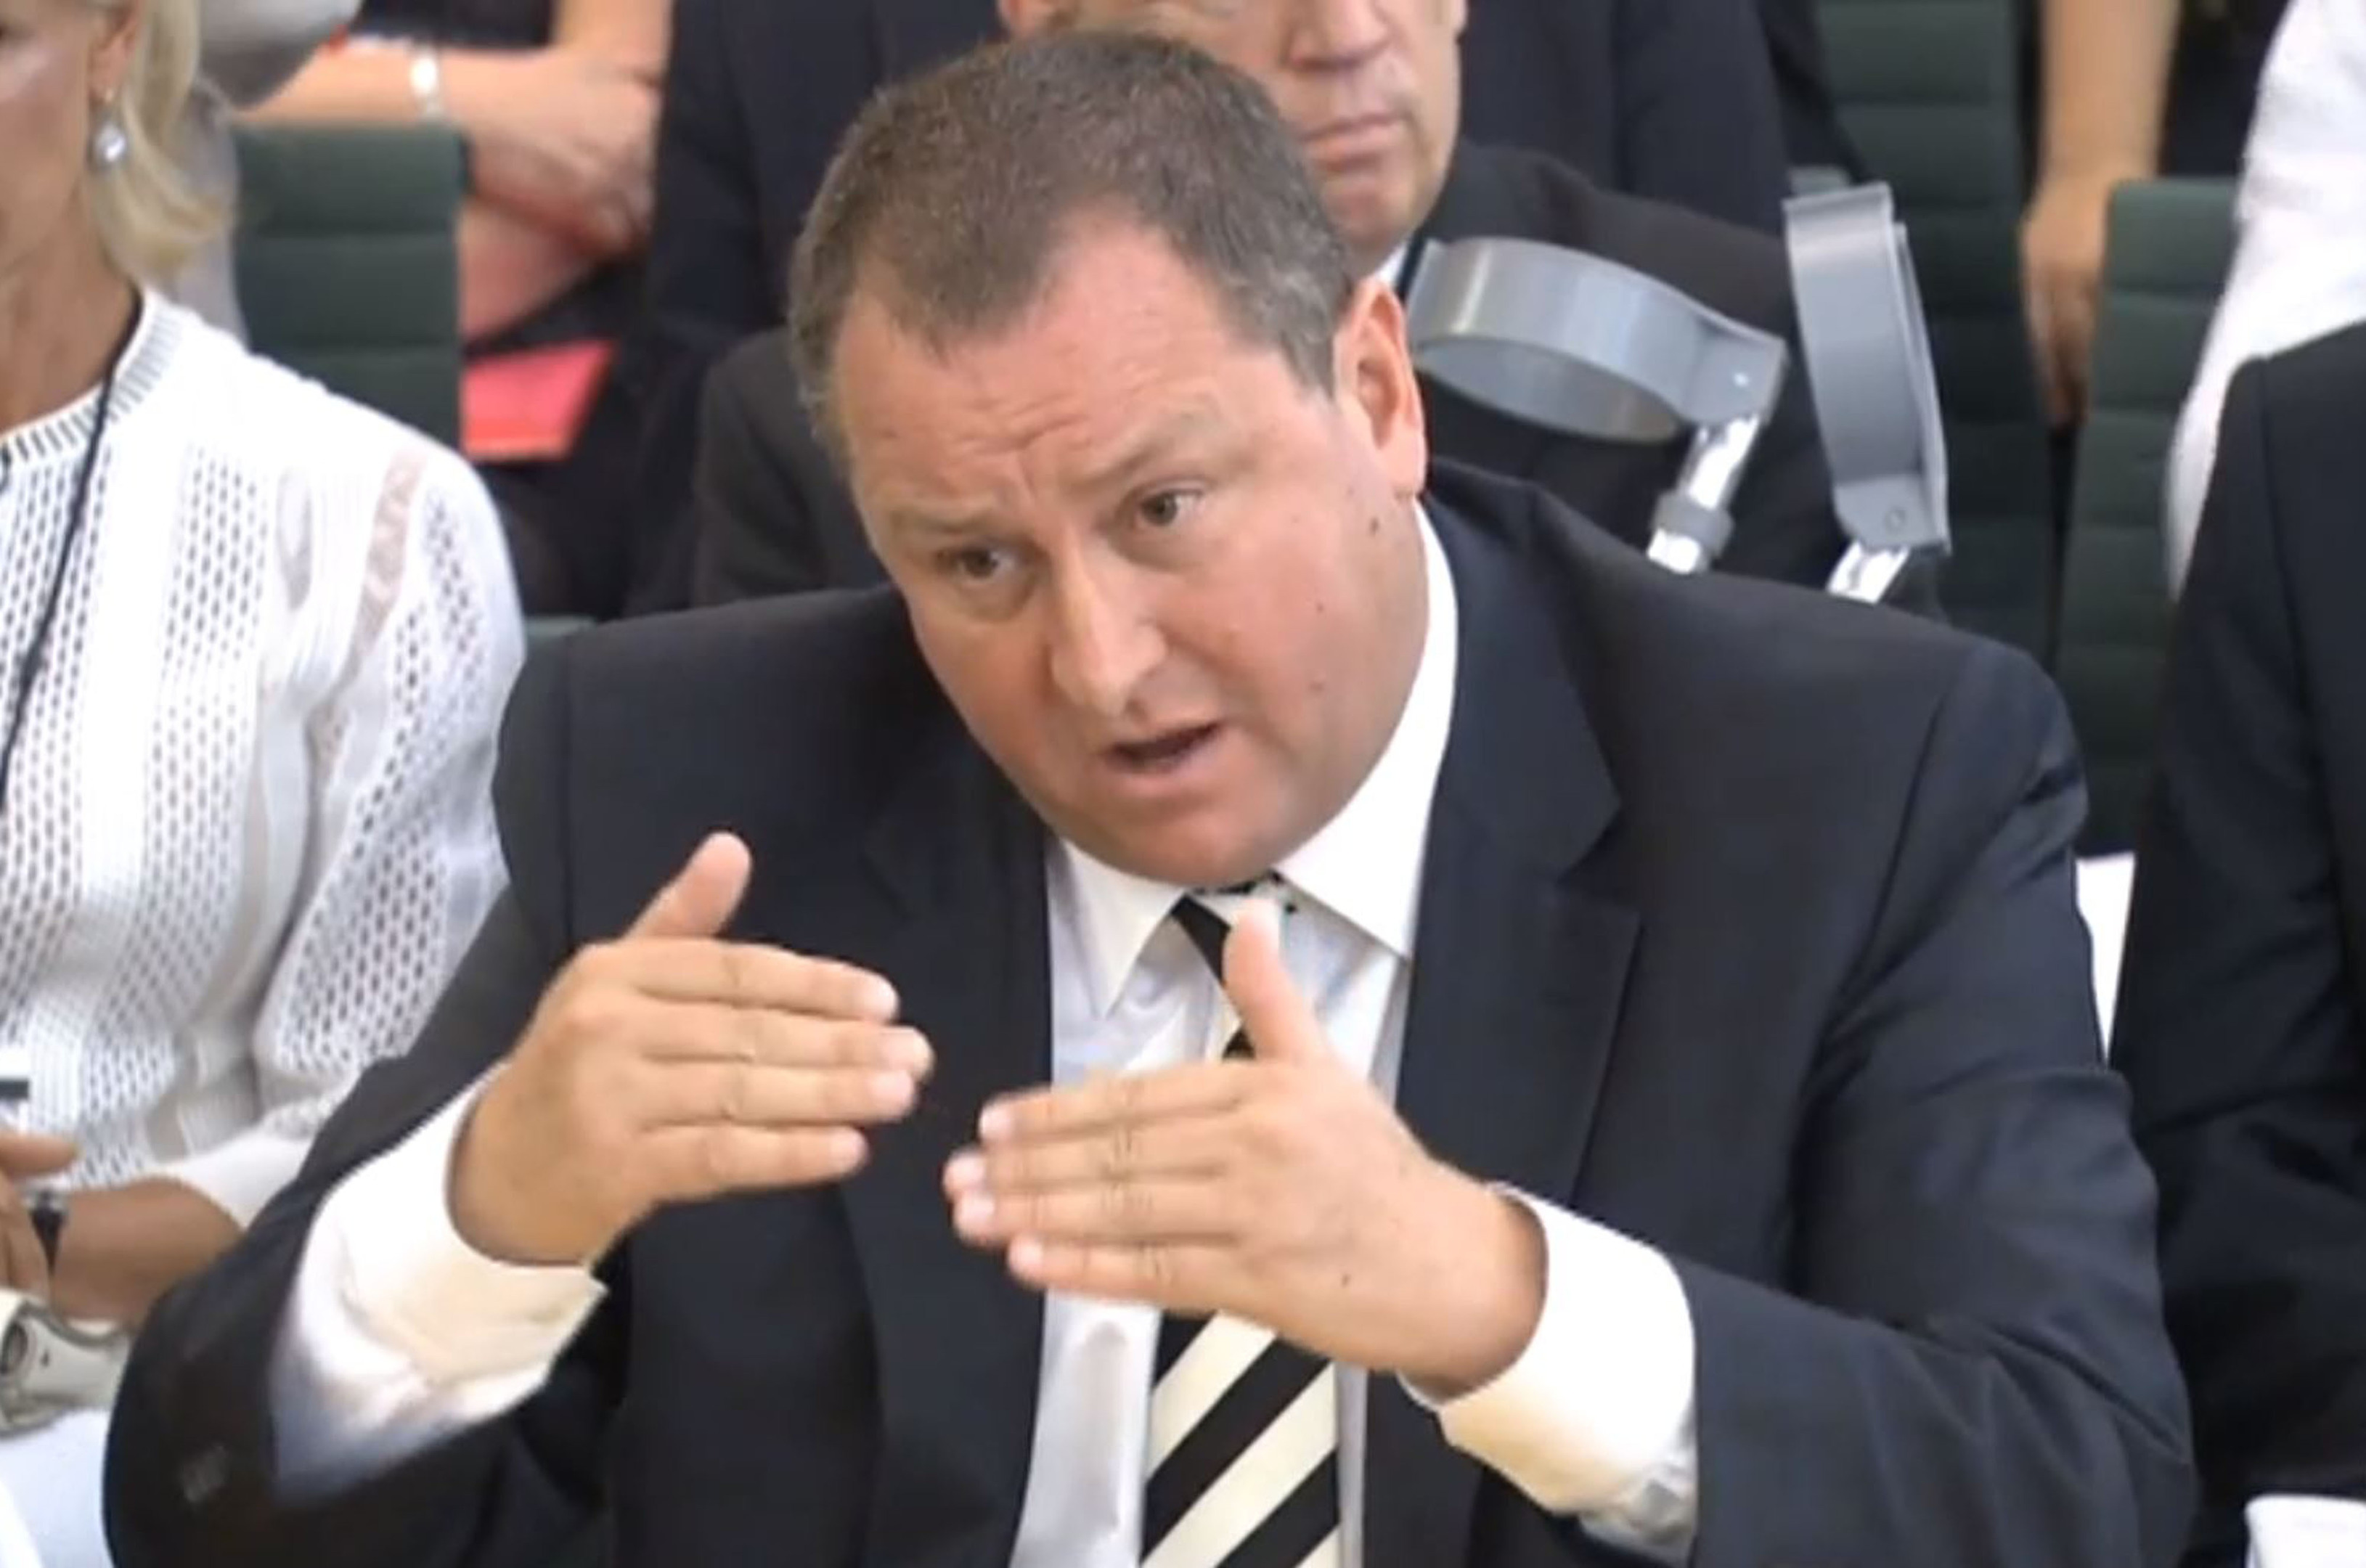 Sports Direct boss Mike Ashley gives evidence to the Business, Innovation and Skills Committee.